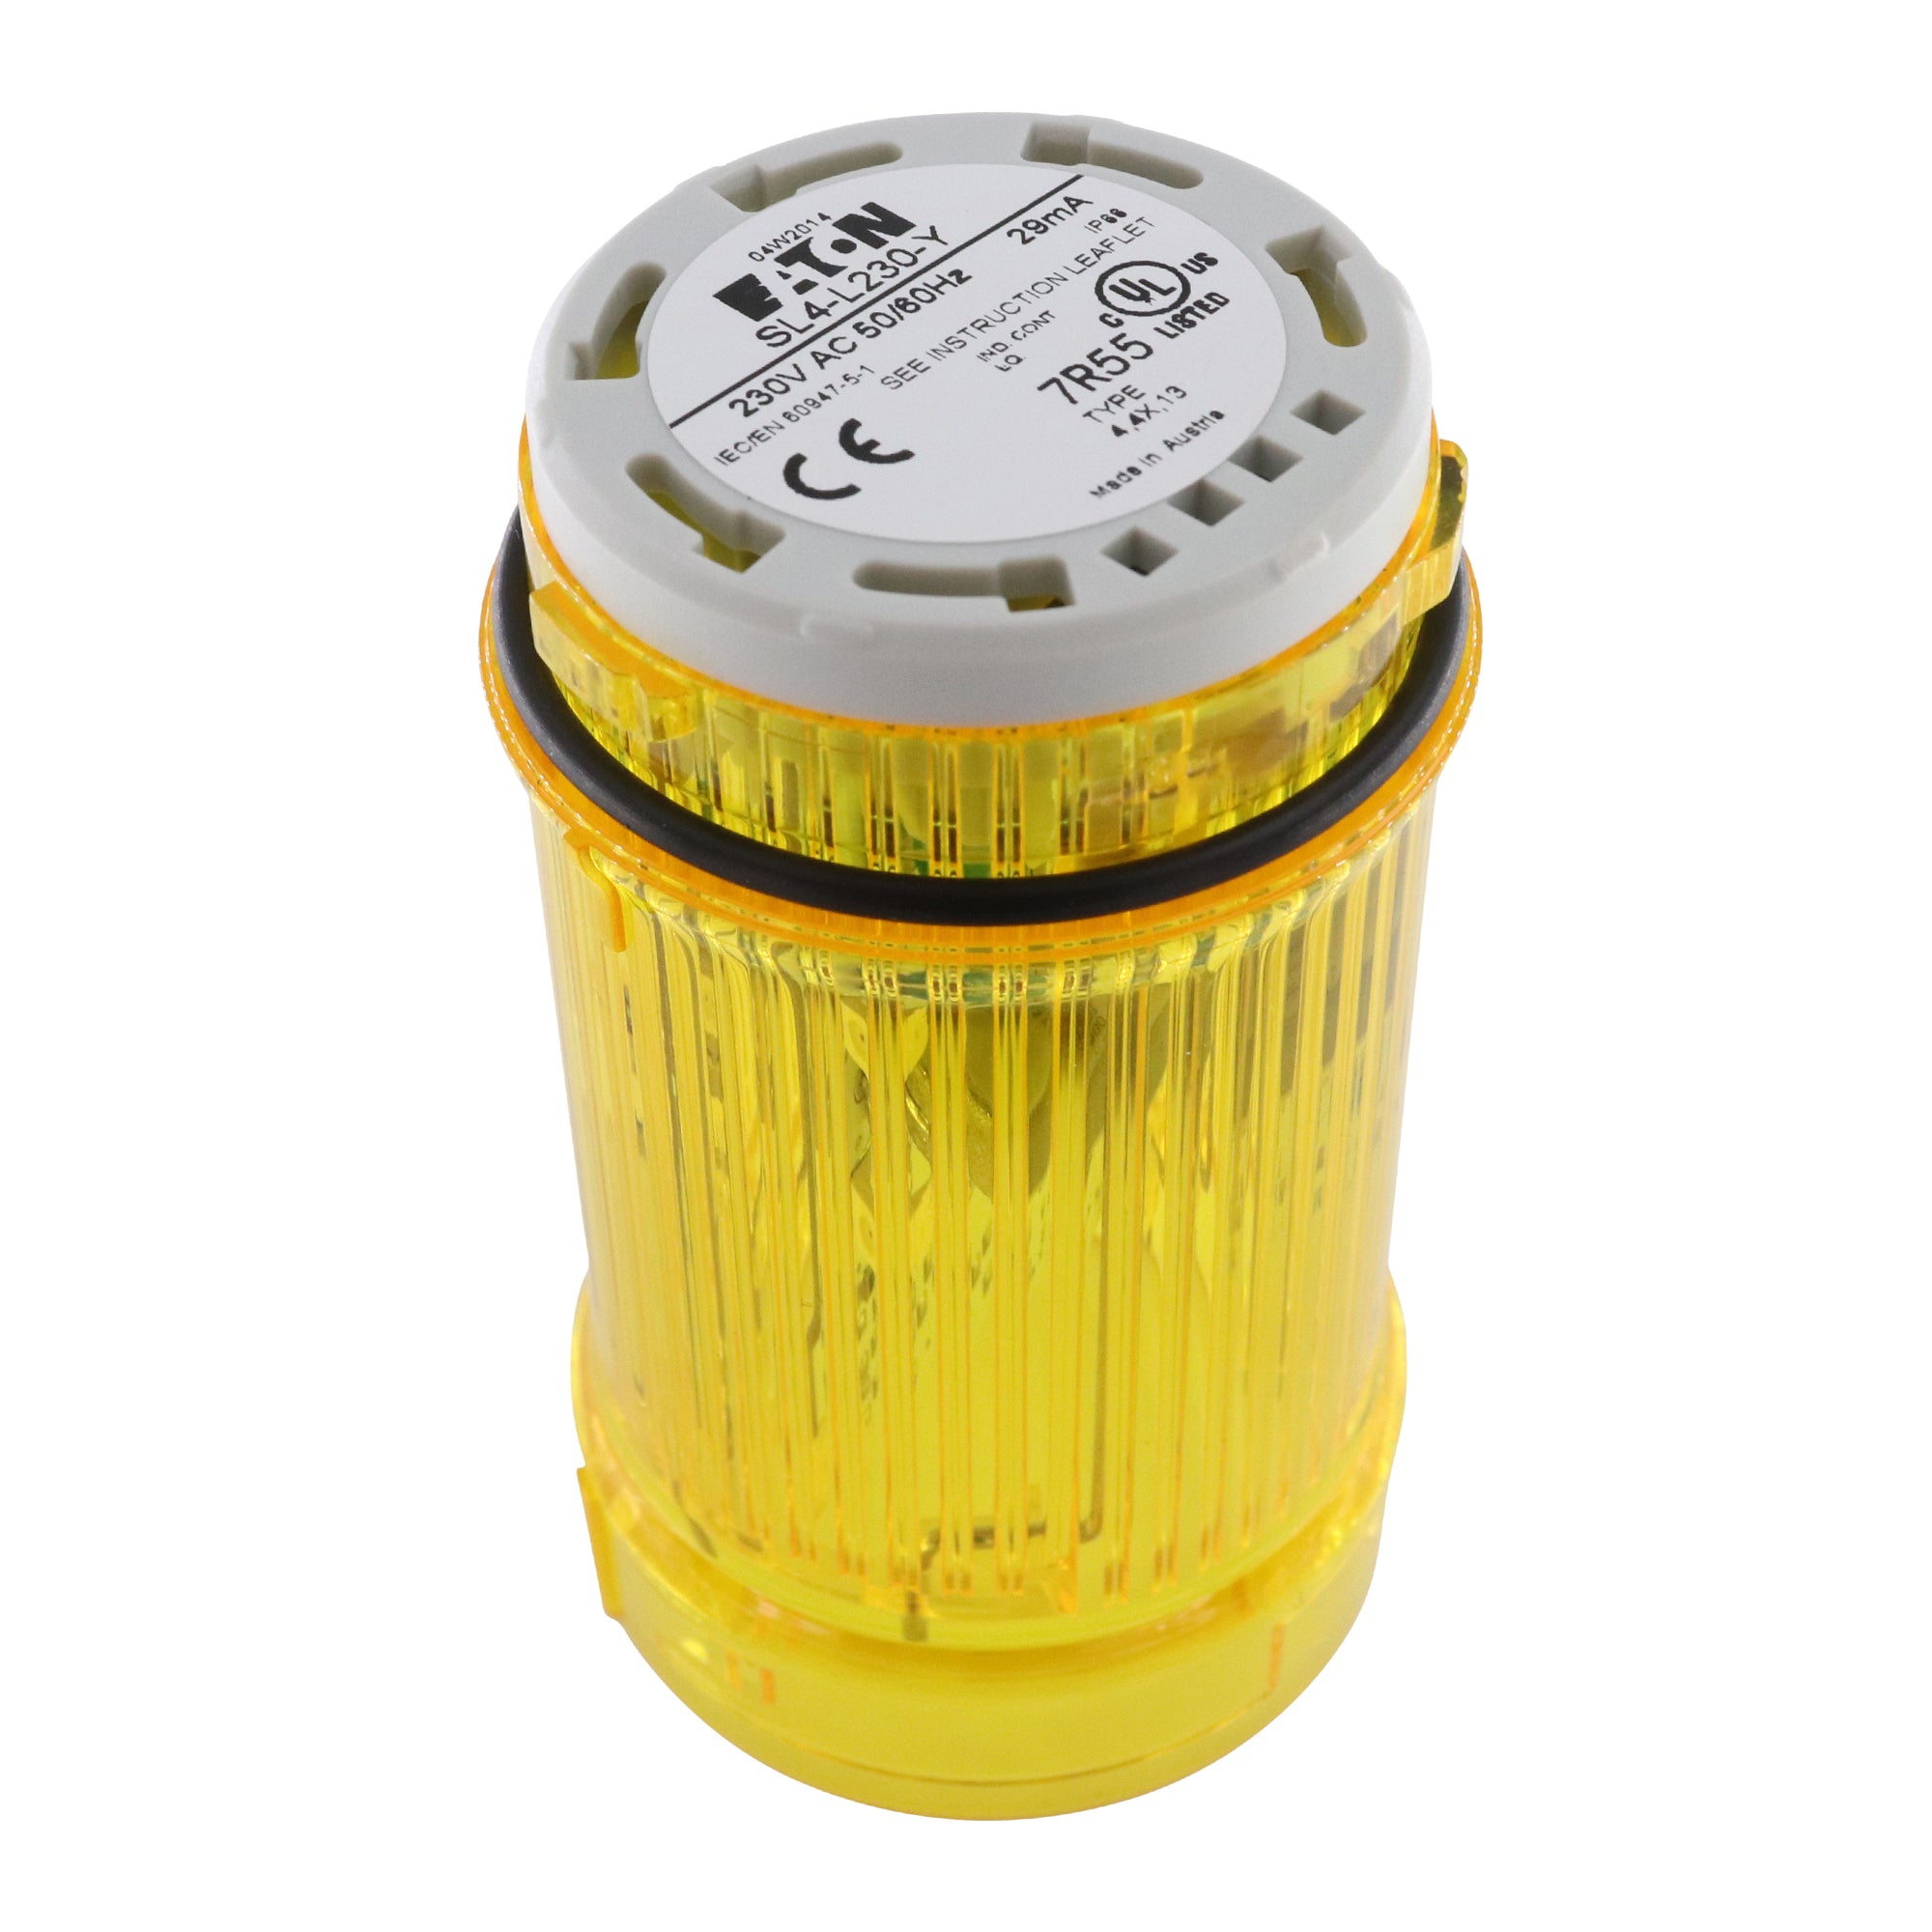 EATON, EATON SL4-L230-Y LED CONTINUOUS TOWER LIGHT BEACON, 40MM,230V, YELLOW